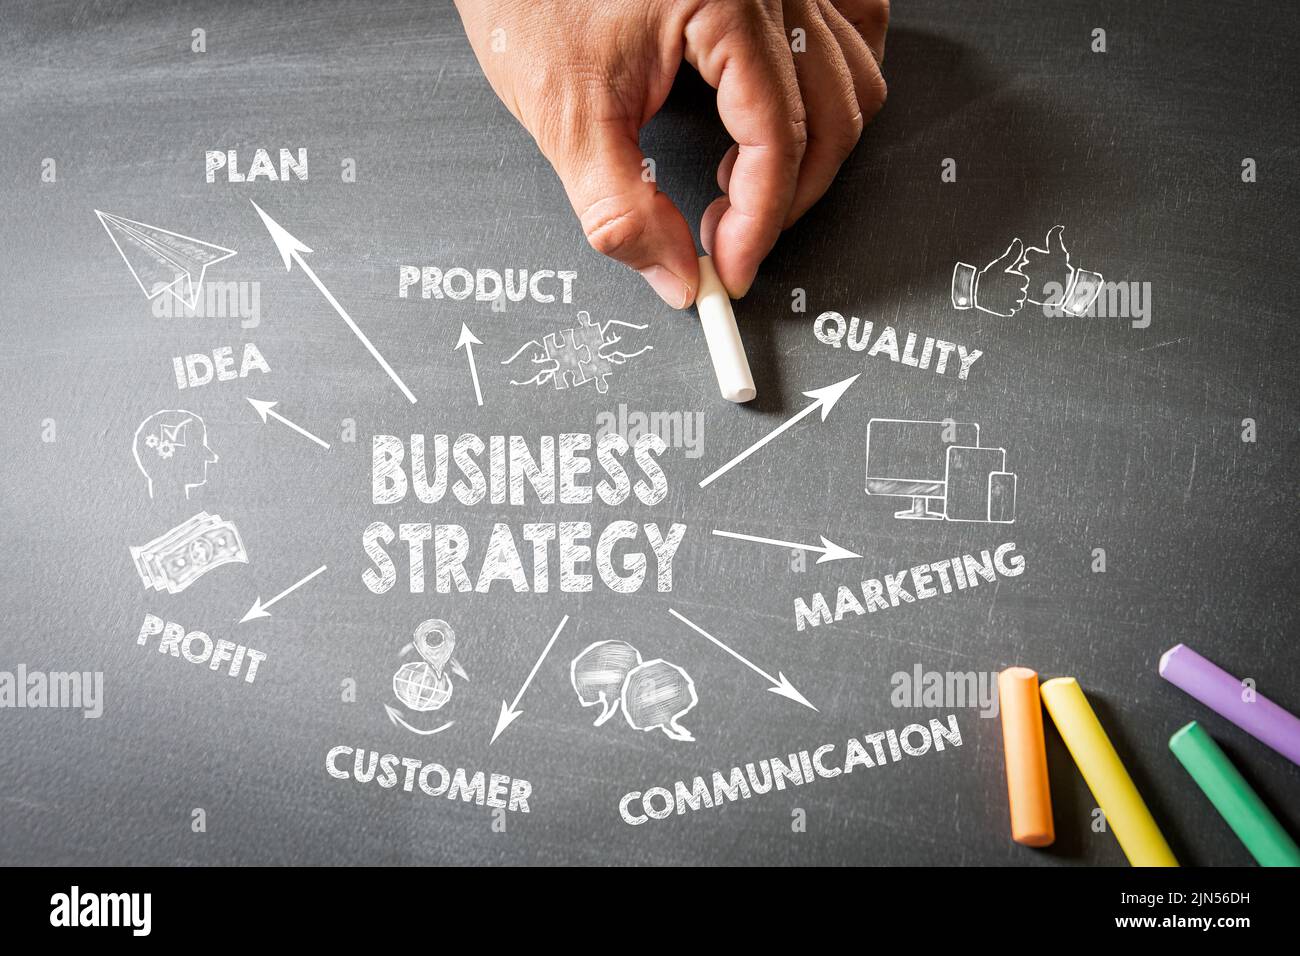 Business strategy. Illustrated icons, key words and directional arrows on a chalkboard. Stock Photo